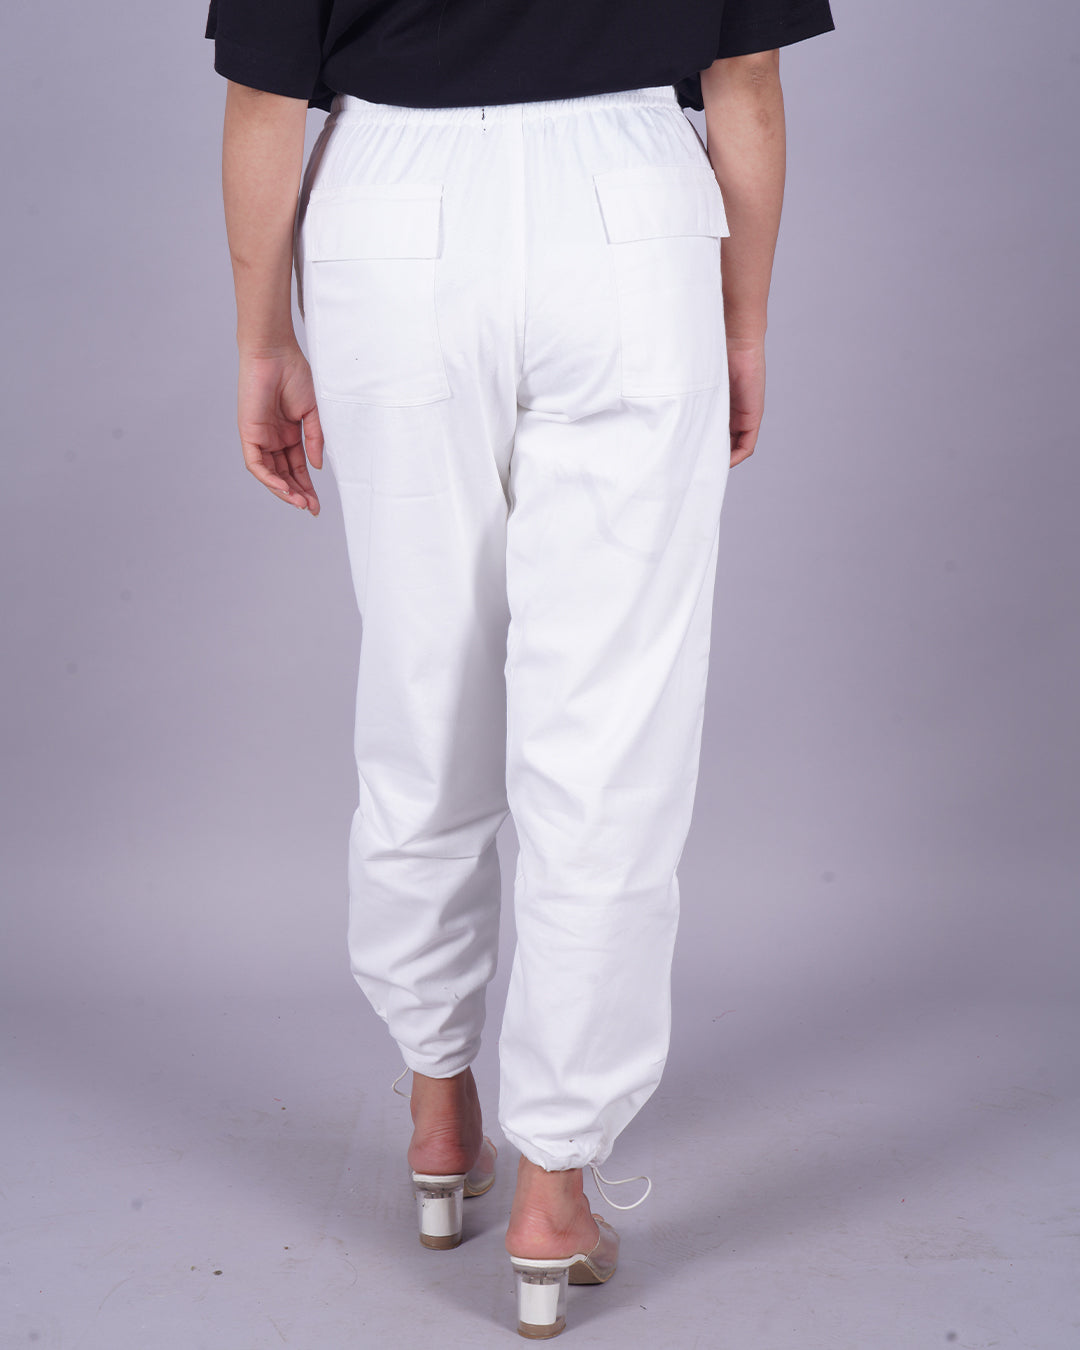 Ladies' White Adjustable Cargo Pants, Perfect for Casual Dining